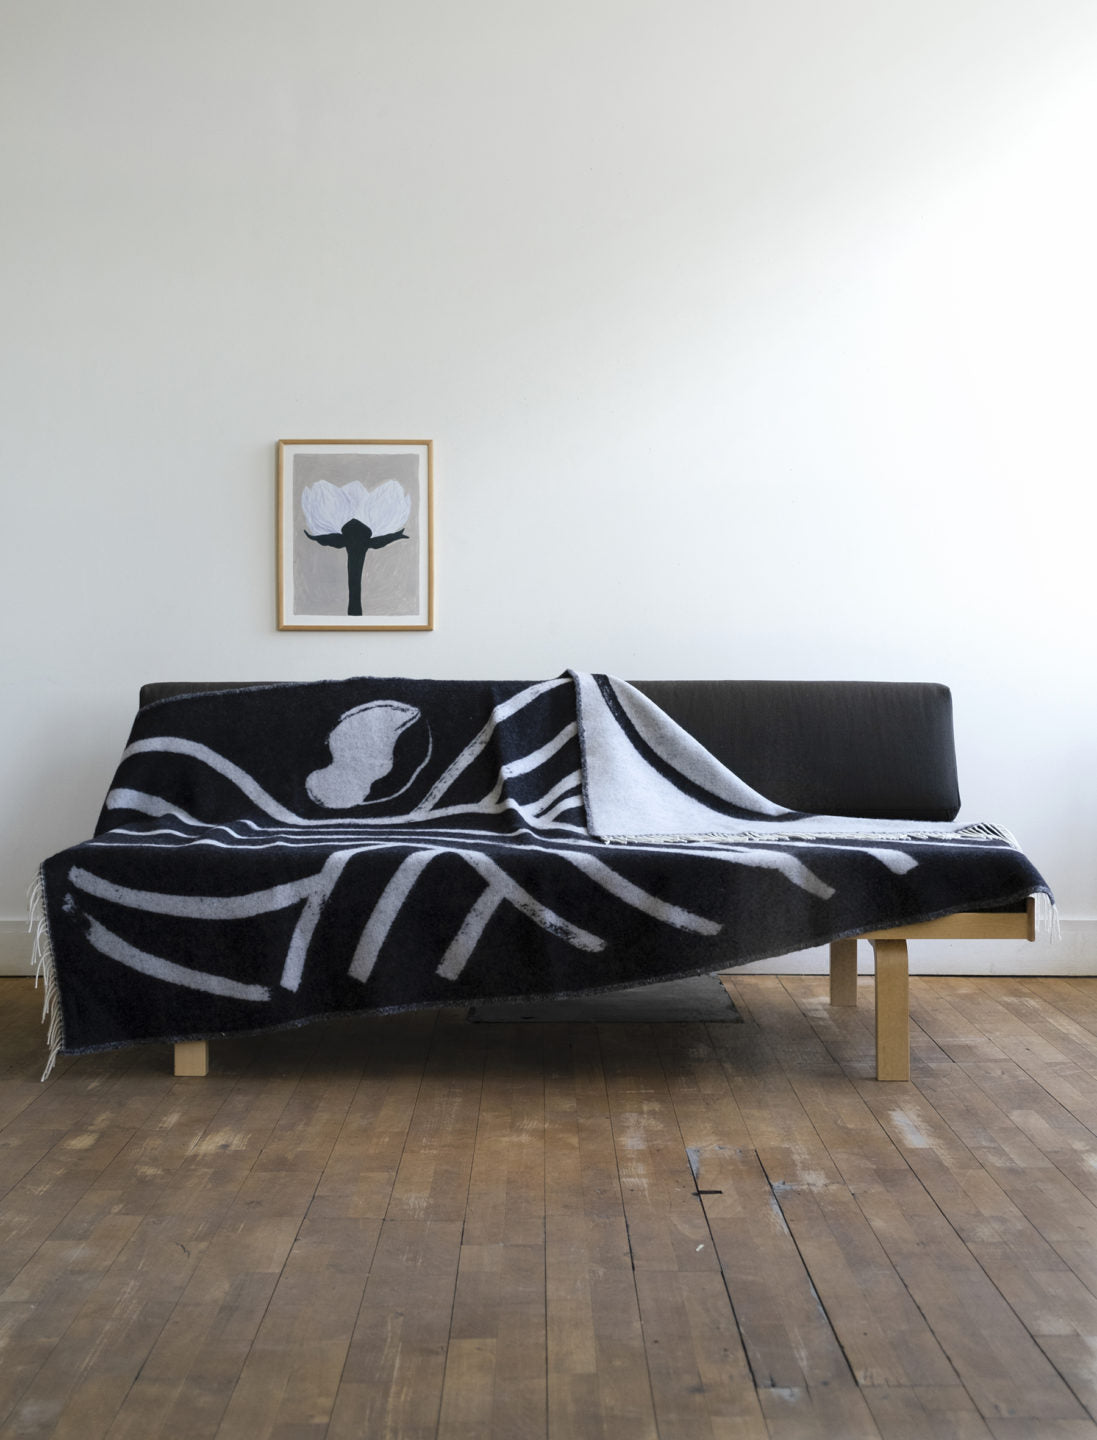 Across a sofa lies a dark grey with light grey patterned lambswool blanket from a collaboration between Sofia Lind and Fine Little Day